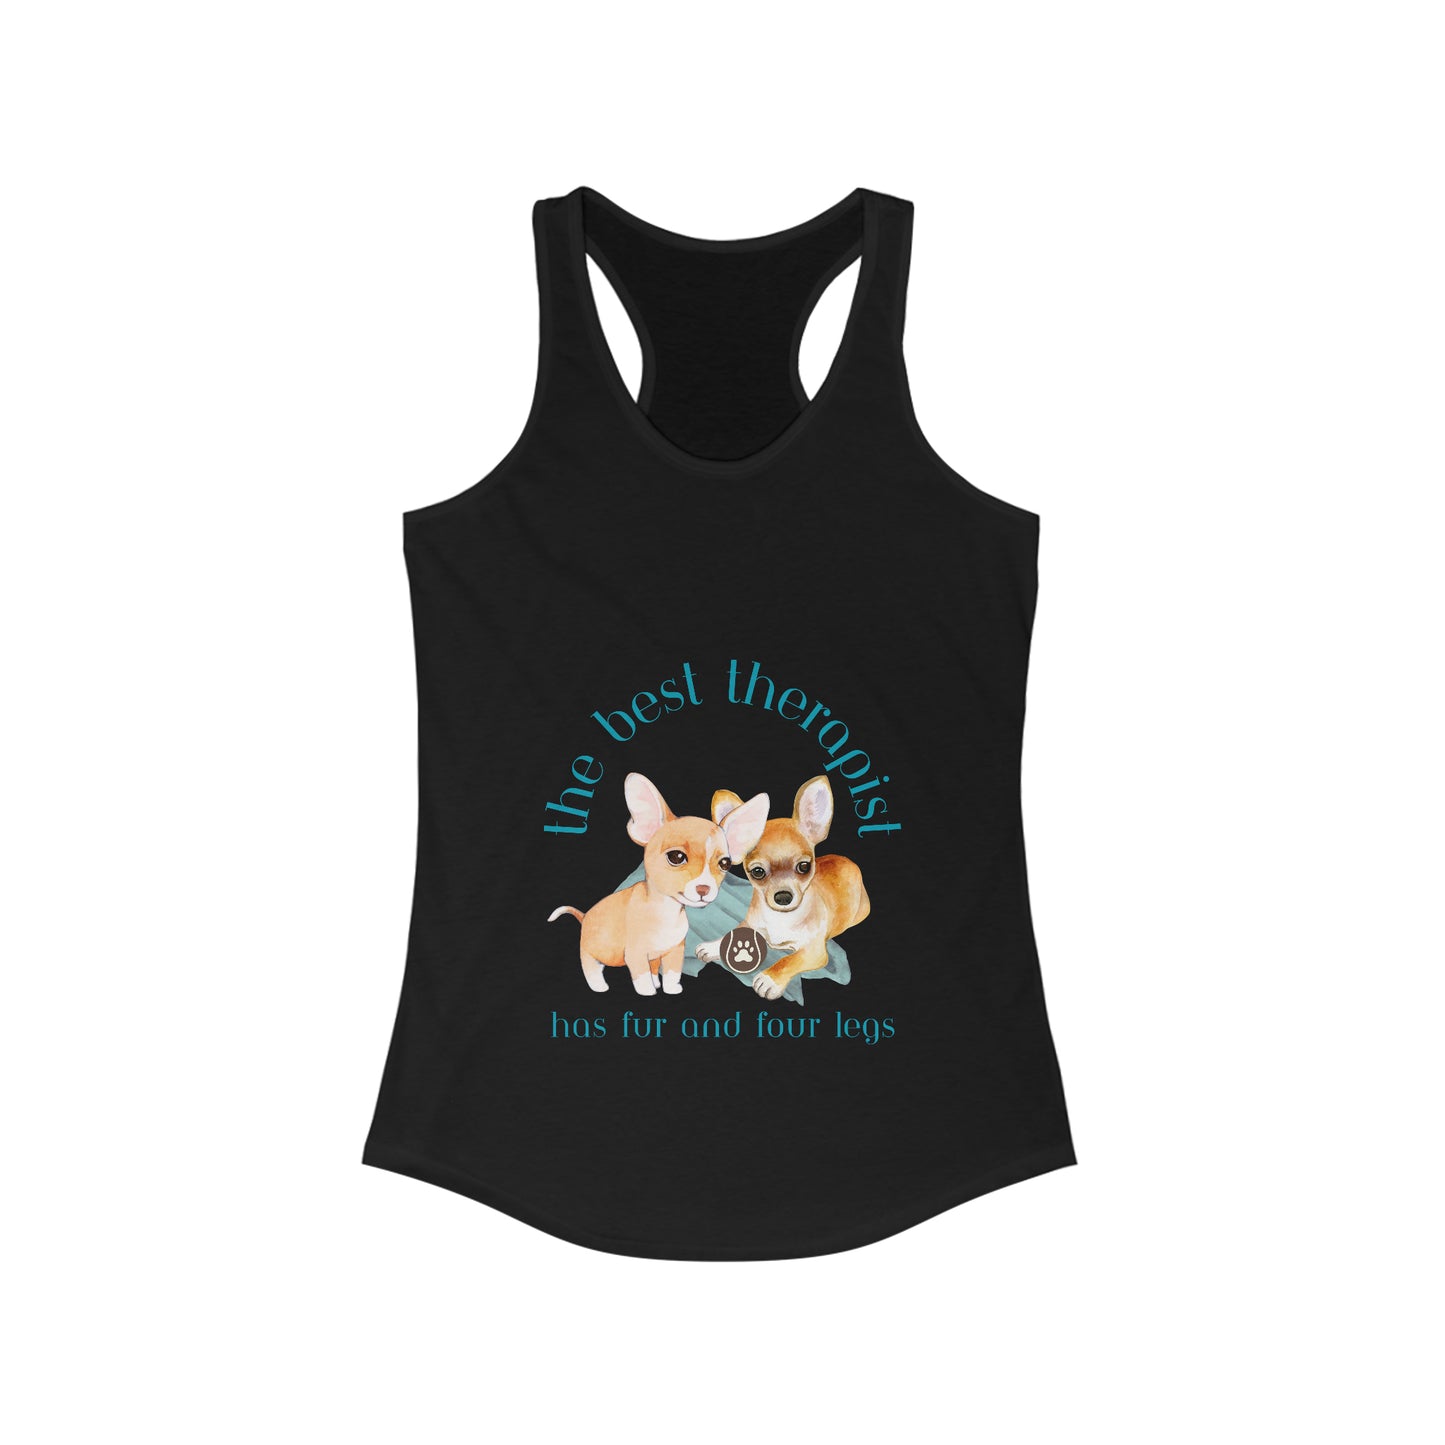 The Best Therapist Has Fur and Four Legs, Chihuahua Apparel Women's Ideal Racerback Tank